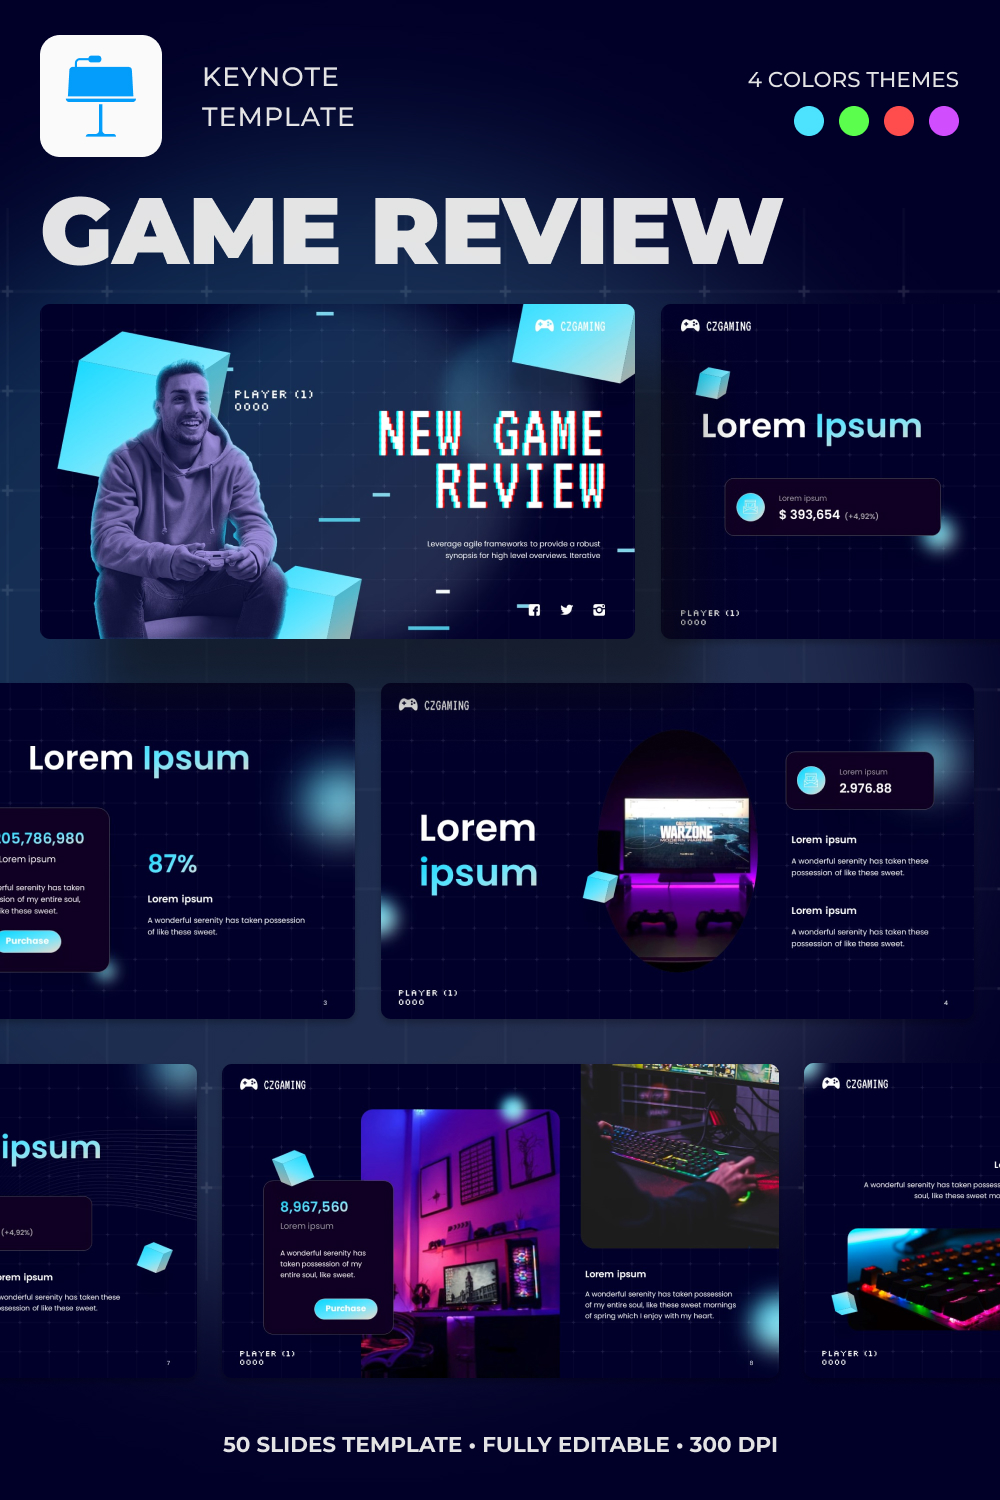 Pinterest images of game review keynote template.